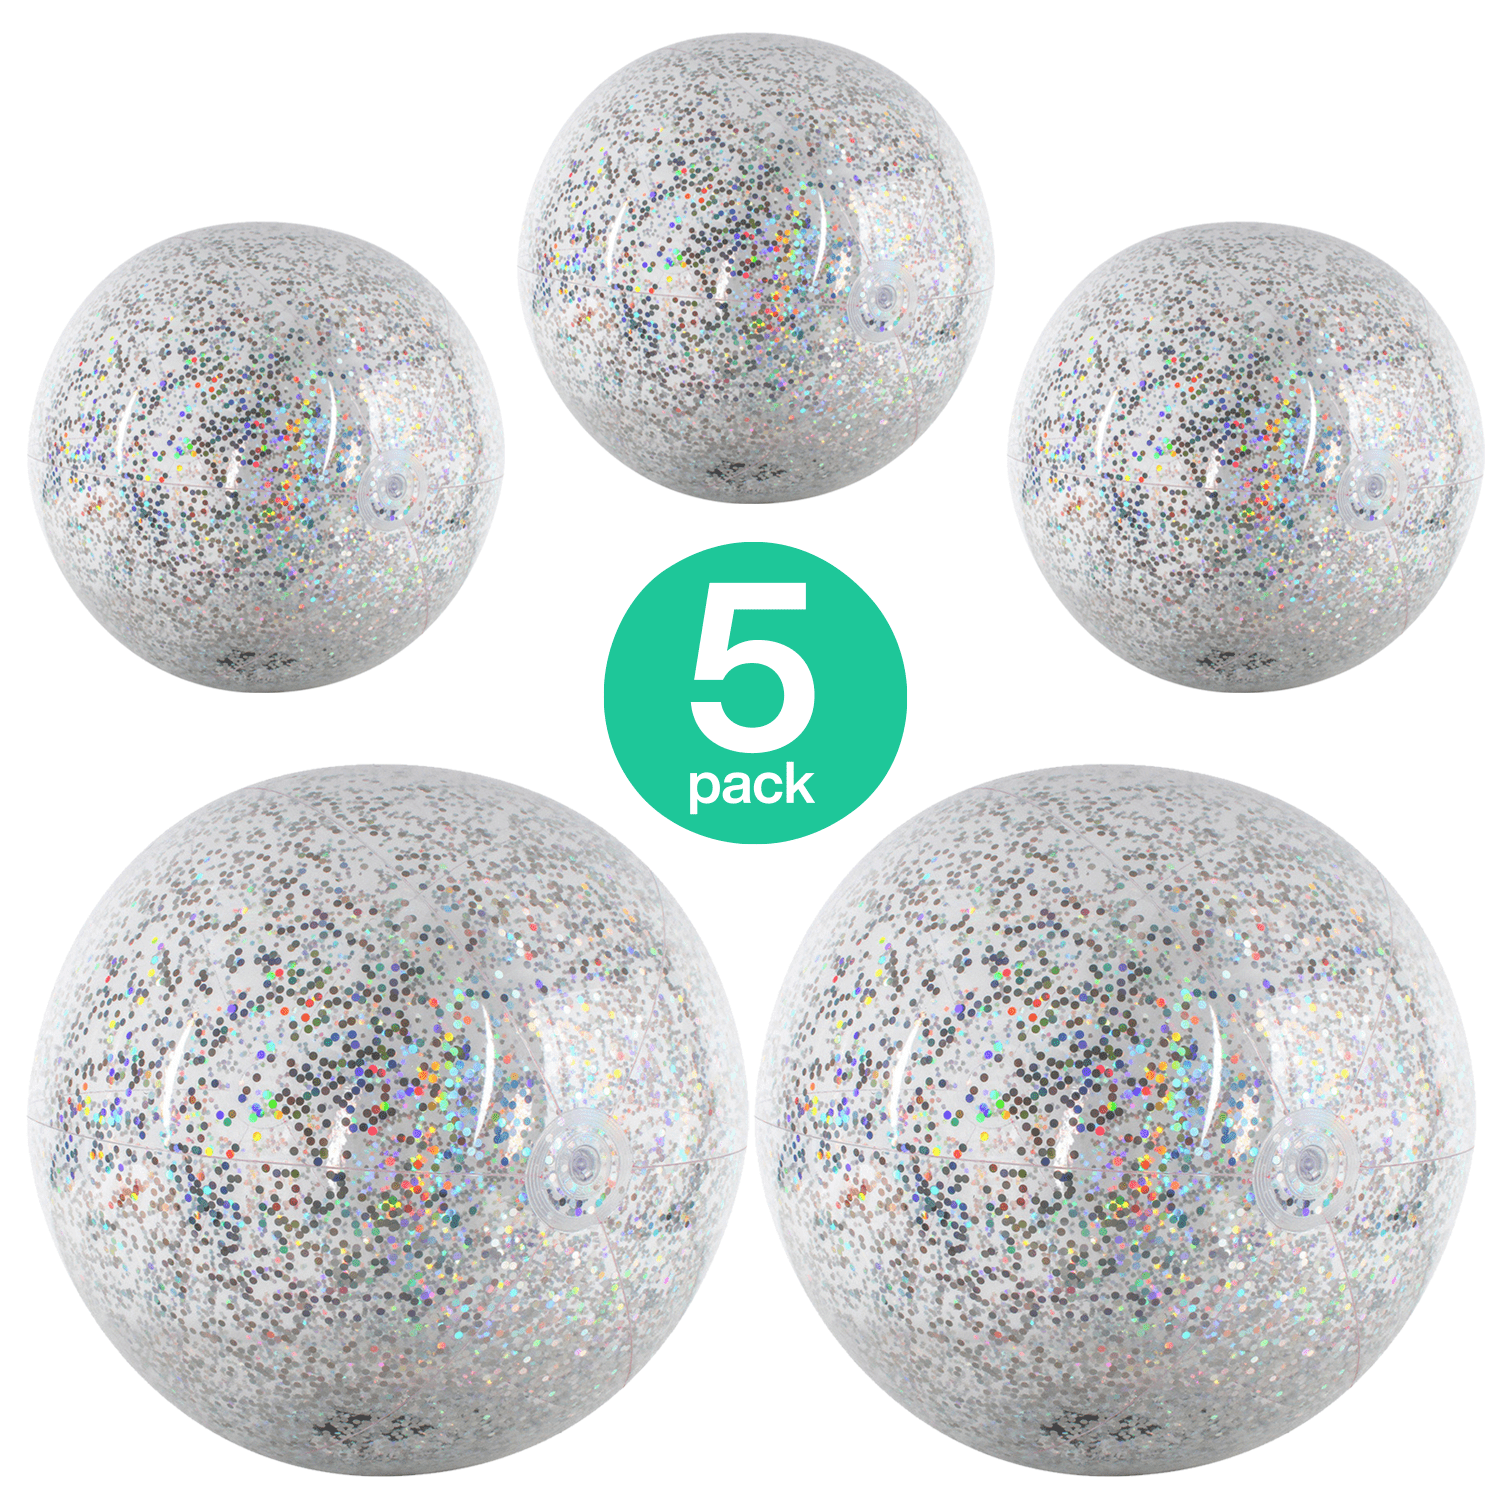 2X 8 Pack Bounce Glitter Bouncy Balls Party Bags Toy Kids Children Favours 